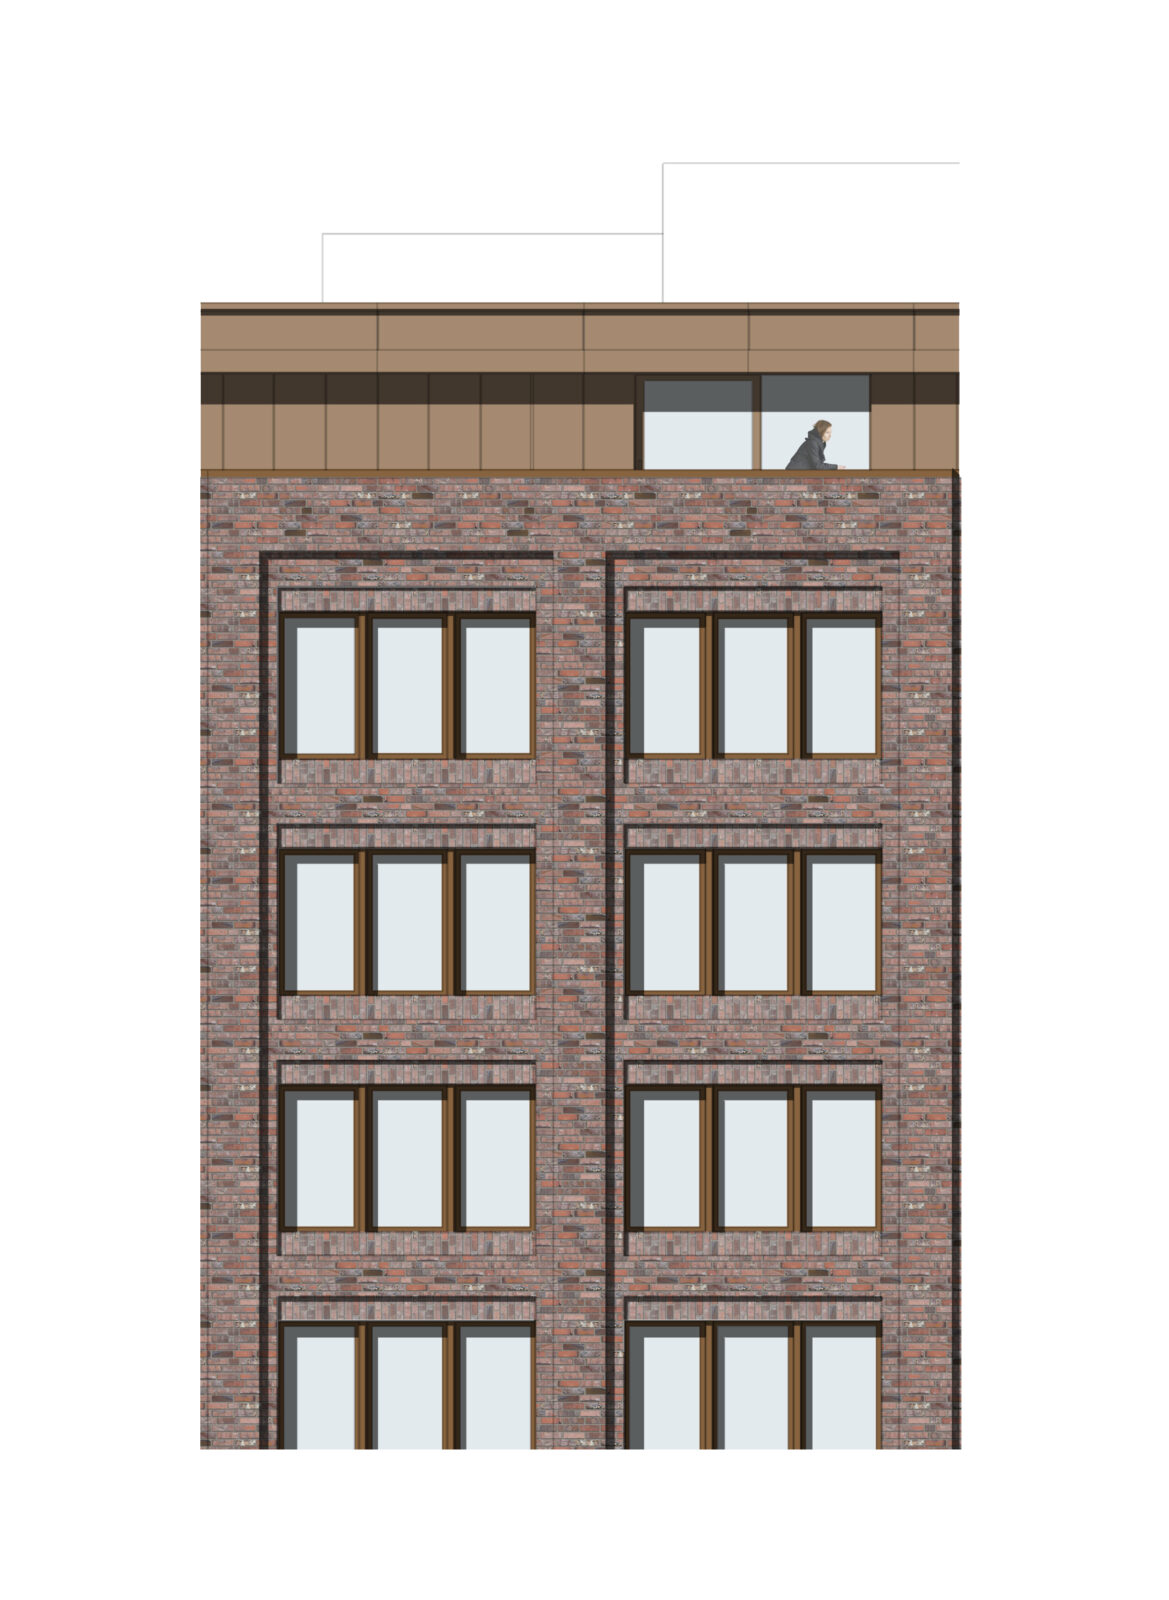 Materiality study of front elevation for development